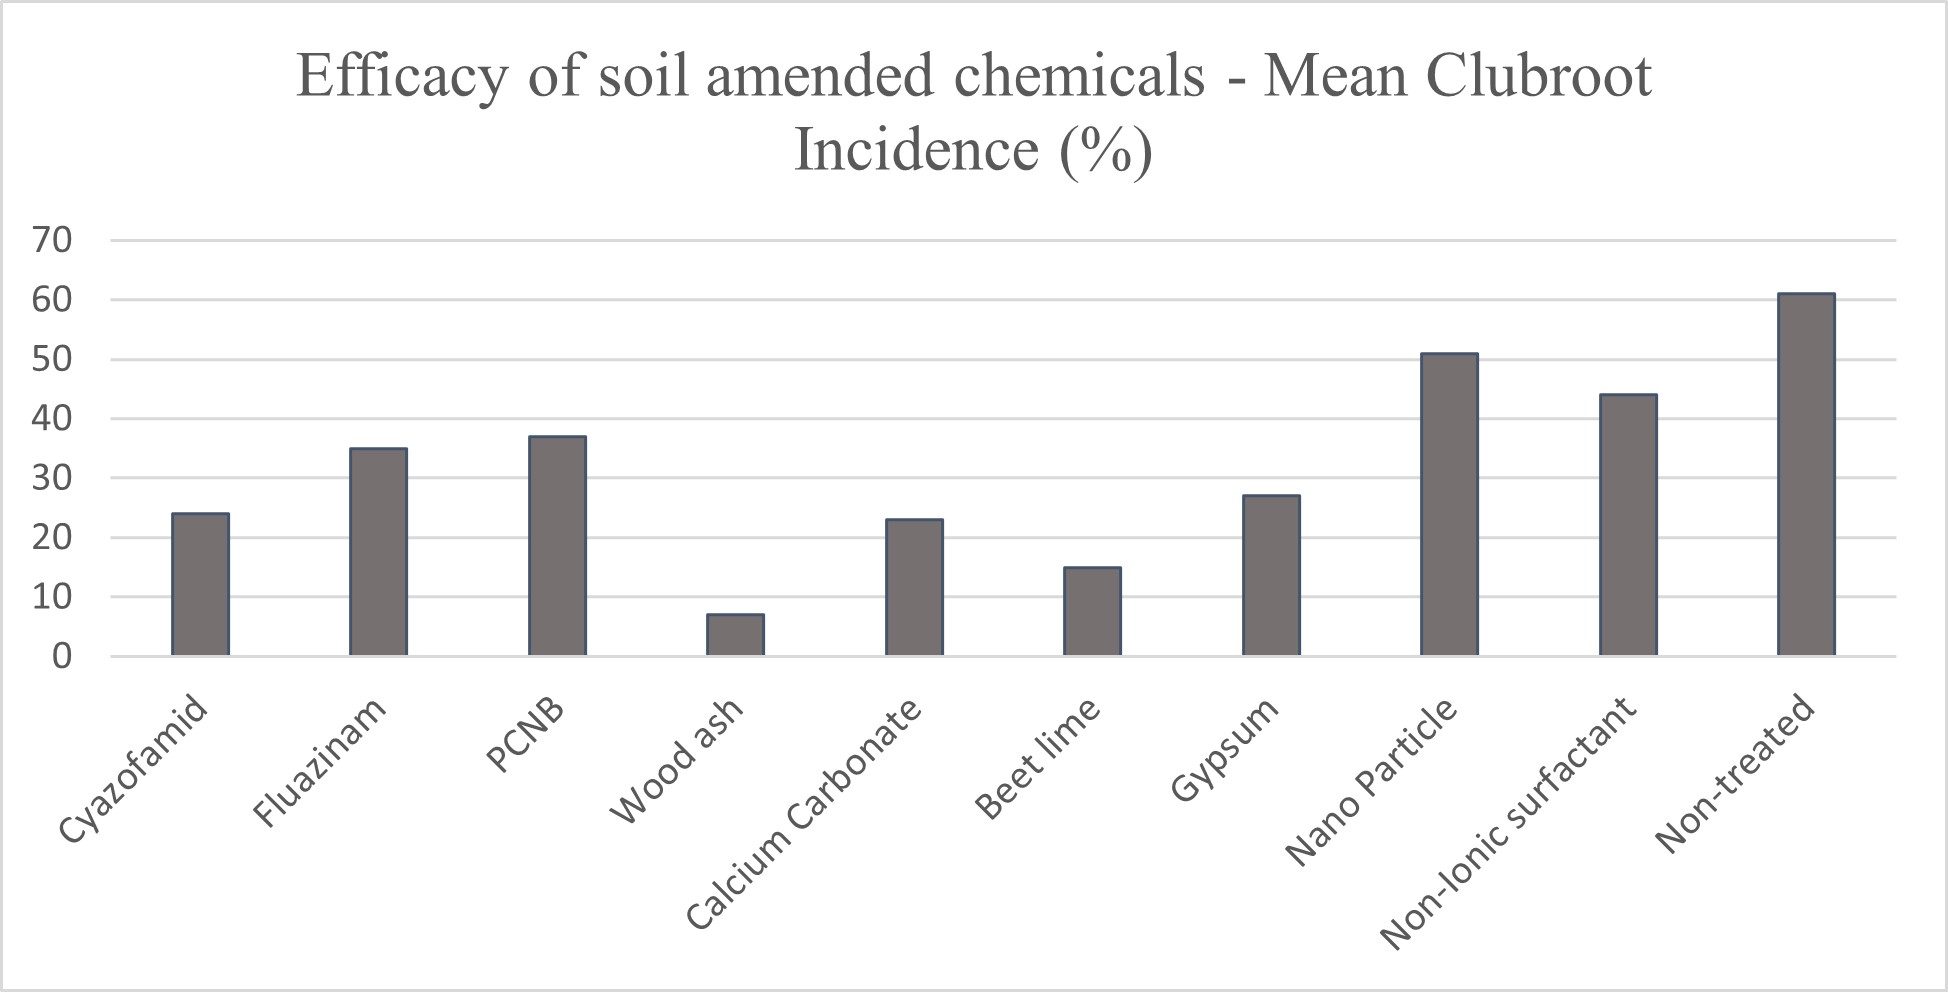 Efficacy of fungicides and soil ameliorating products against clubroot incidence in field conditions.